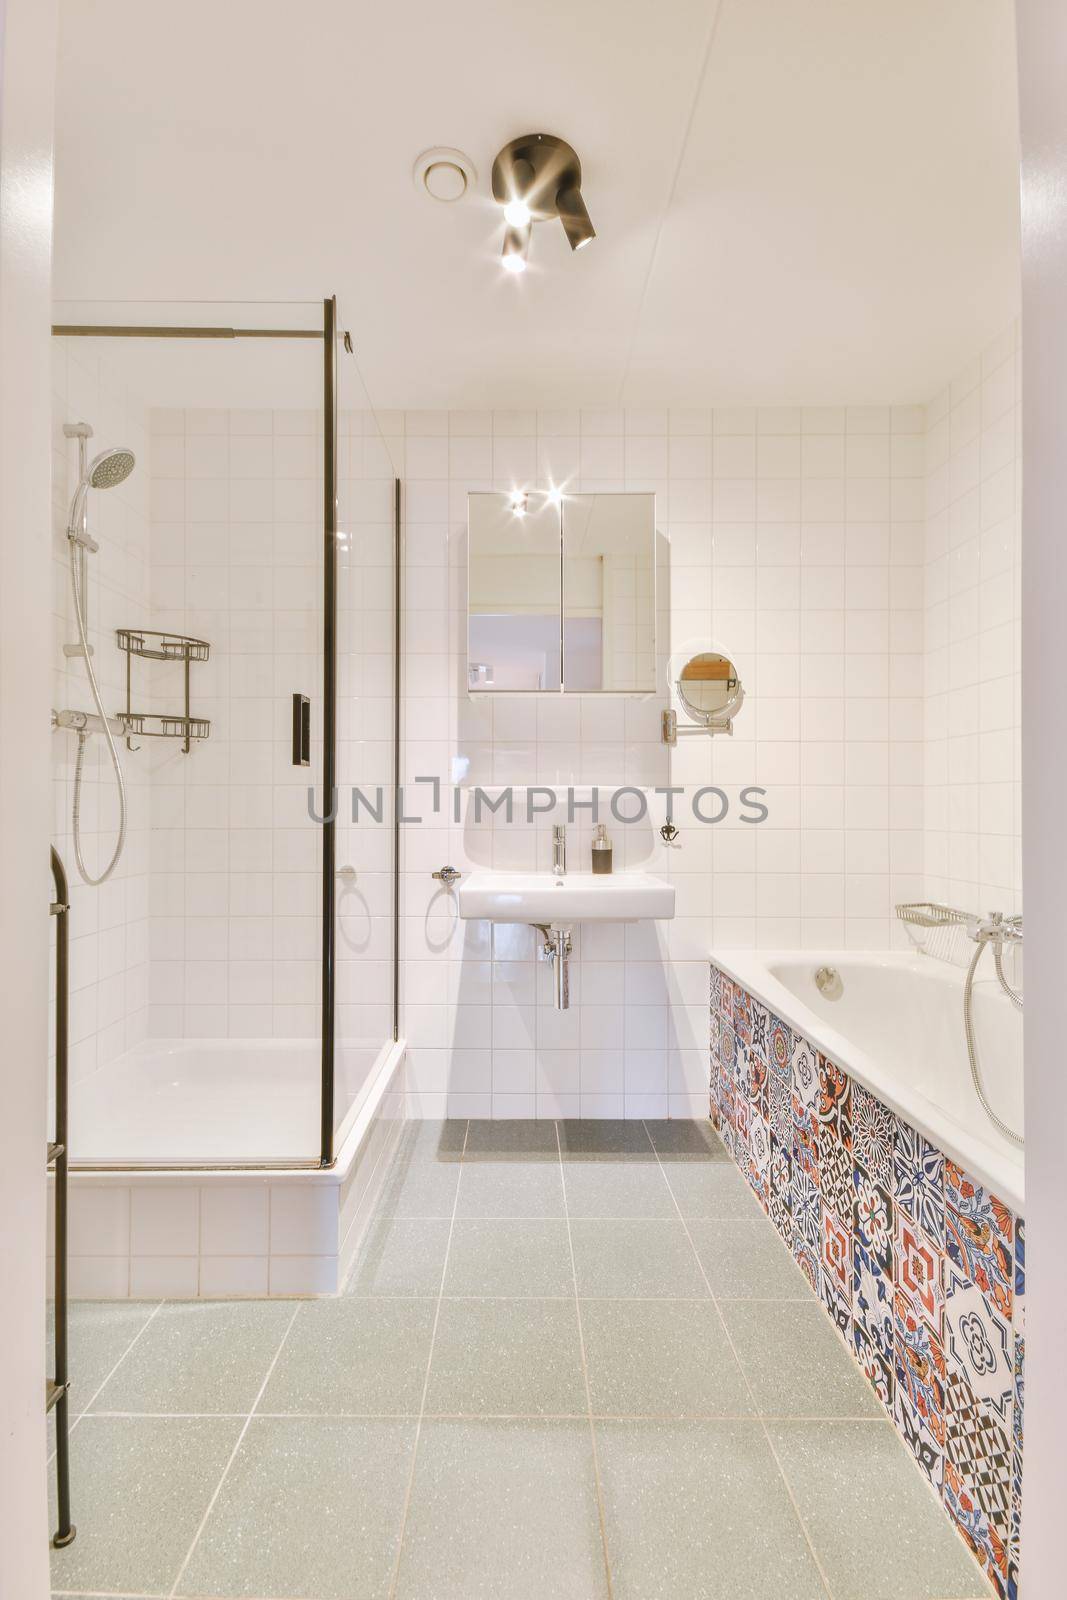 Bathroom interior with tile mosaic, bathtub, sink and shower in a modern apartment